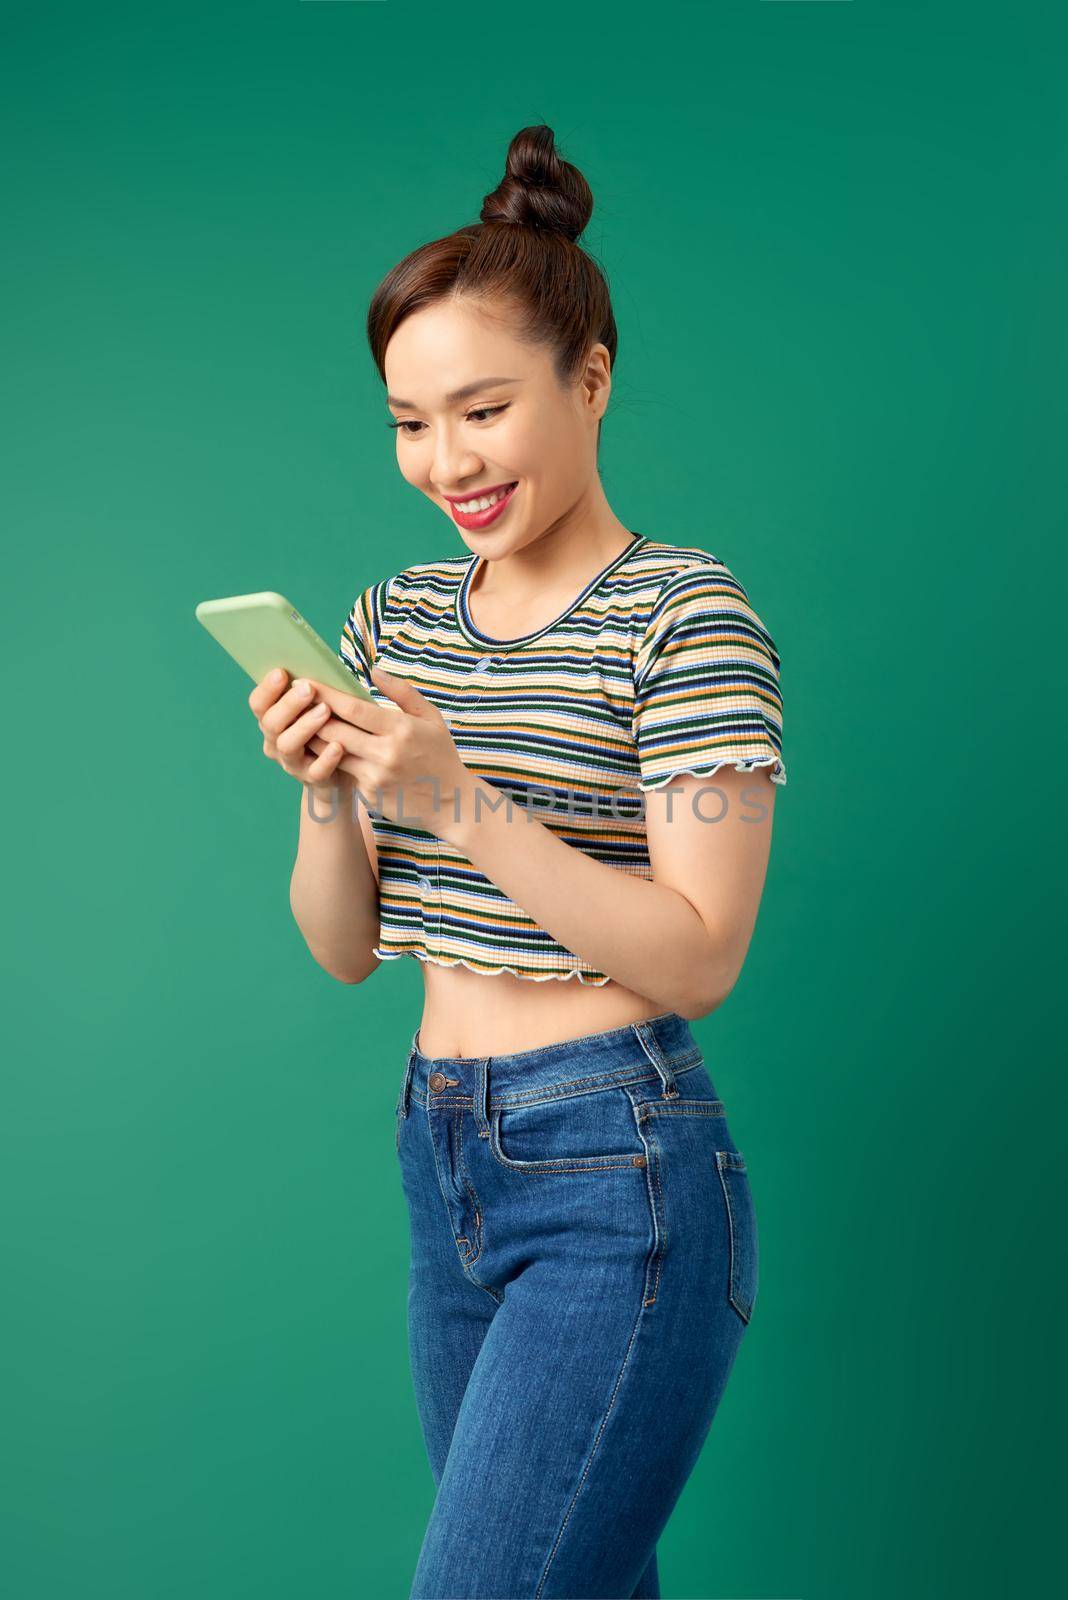 Smiling young Asian girl using smart phone isolated over green background.